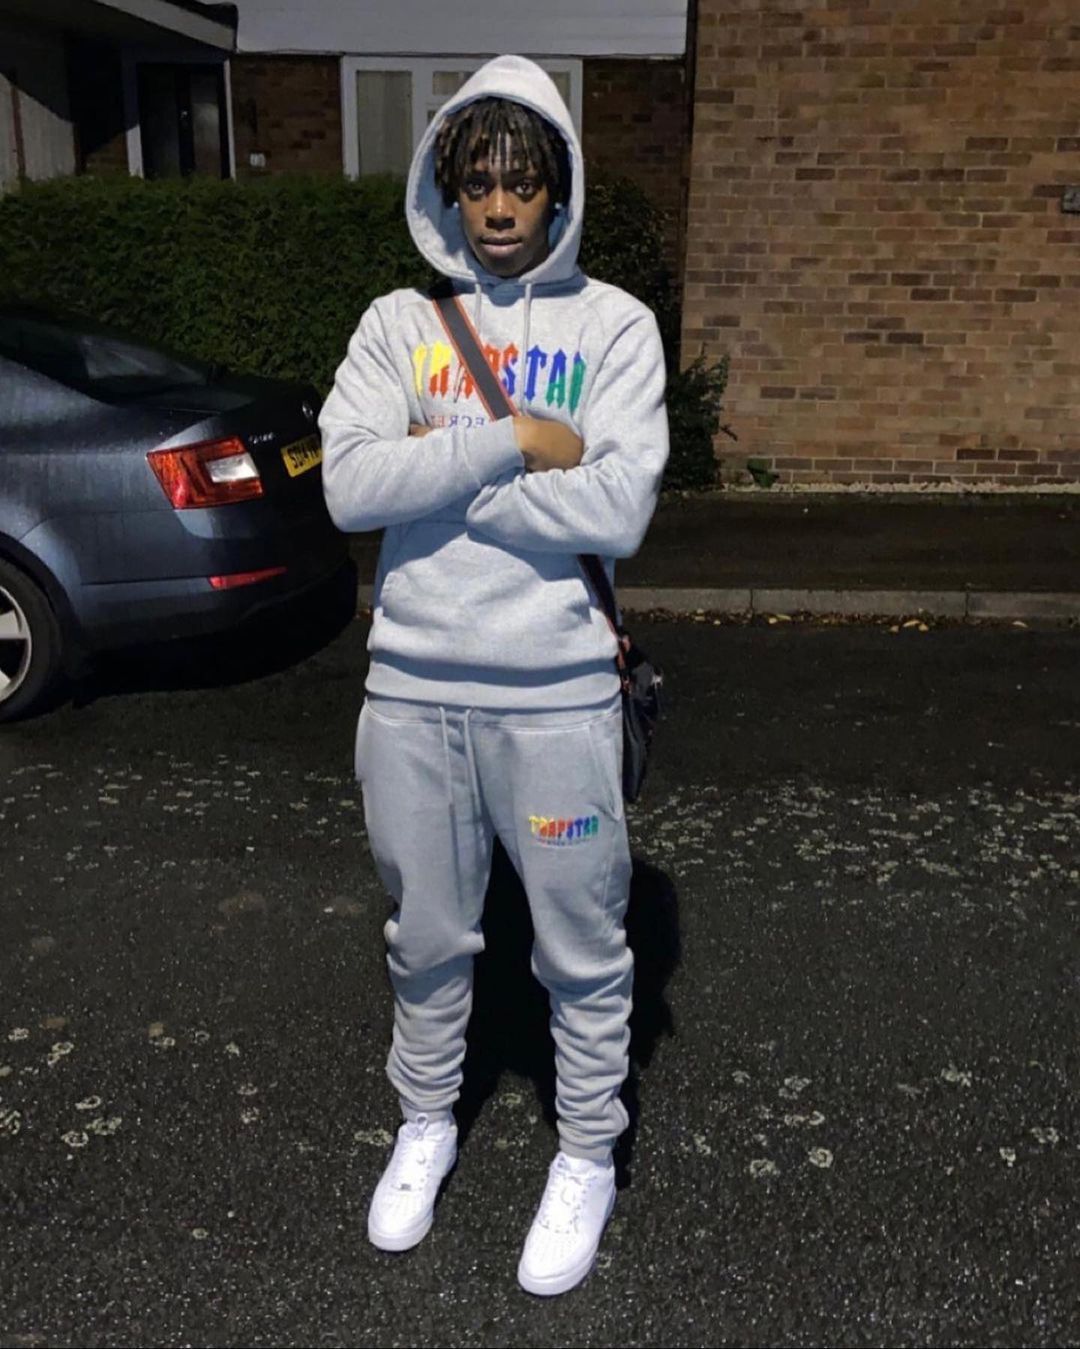 Trapstar Chenille Decoded Hoodie Tracksuit - CANDY FLAVOURS